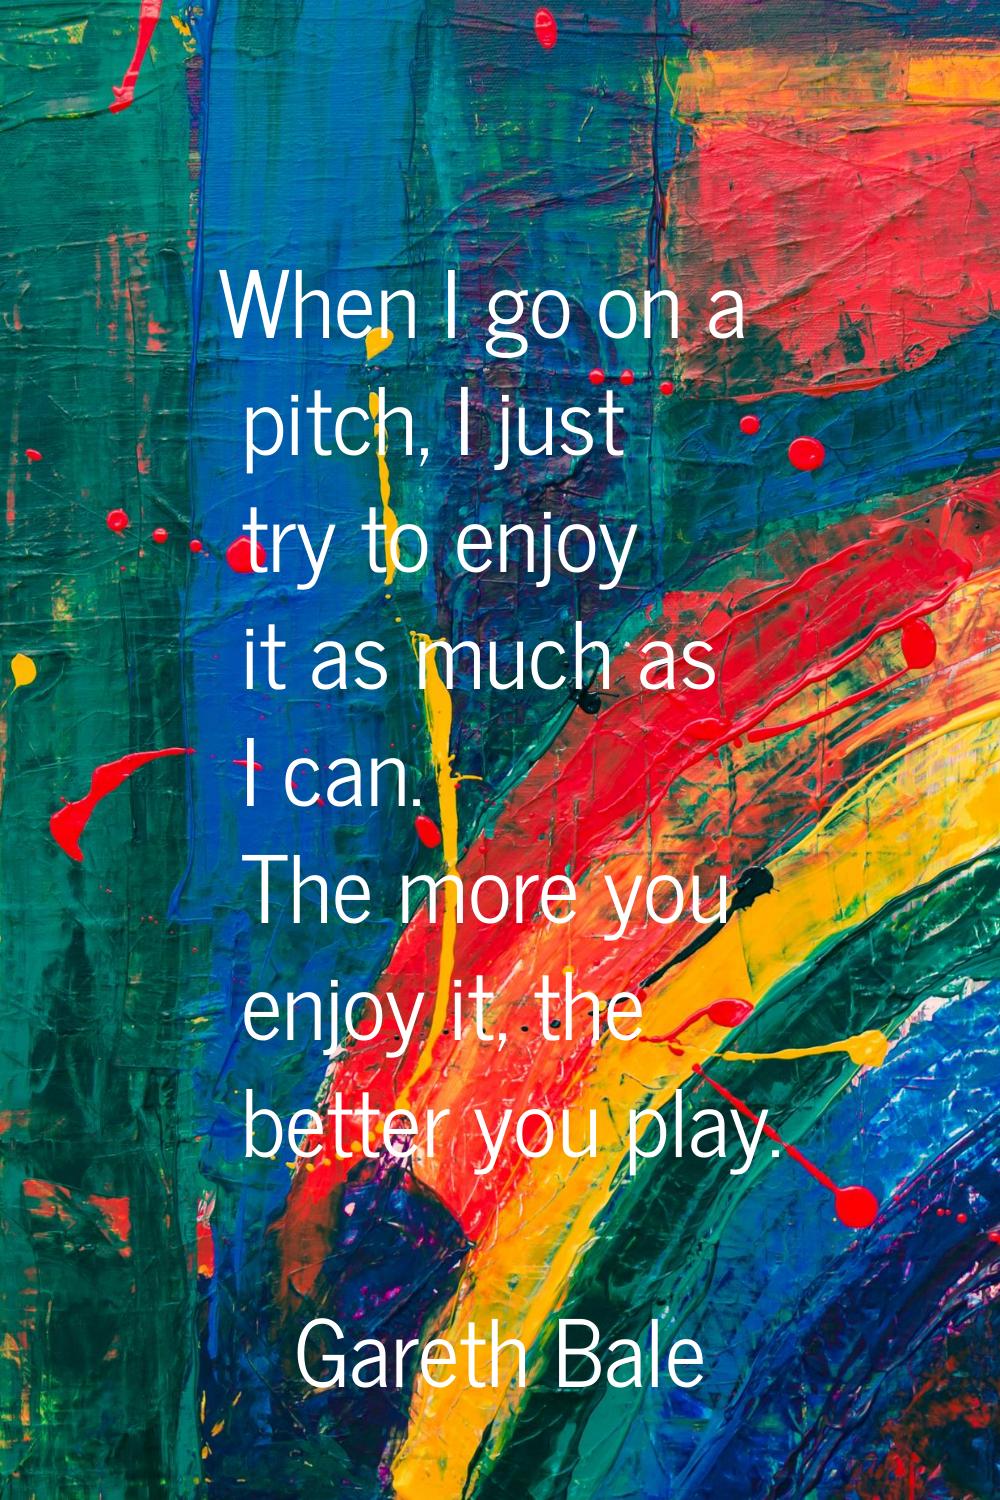 When I go on a pitch, I just try to enjoy it as much as I can. The more you enjoy it, the better yo